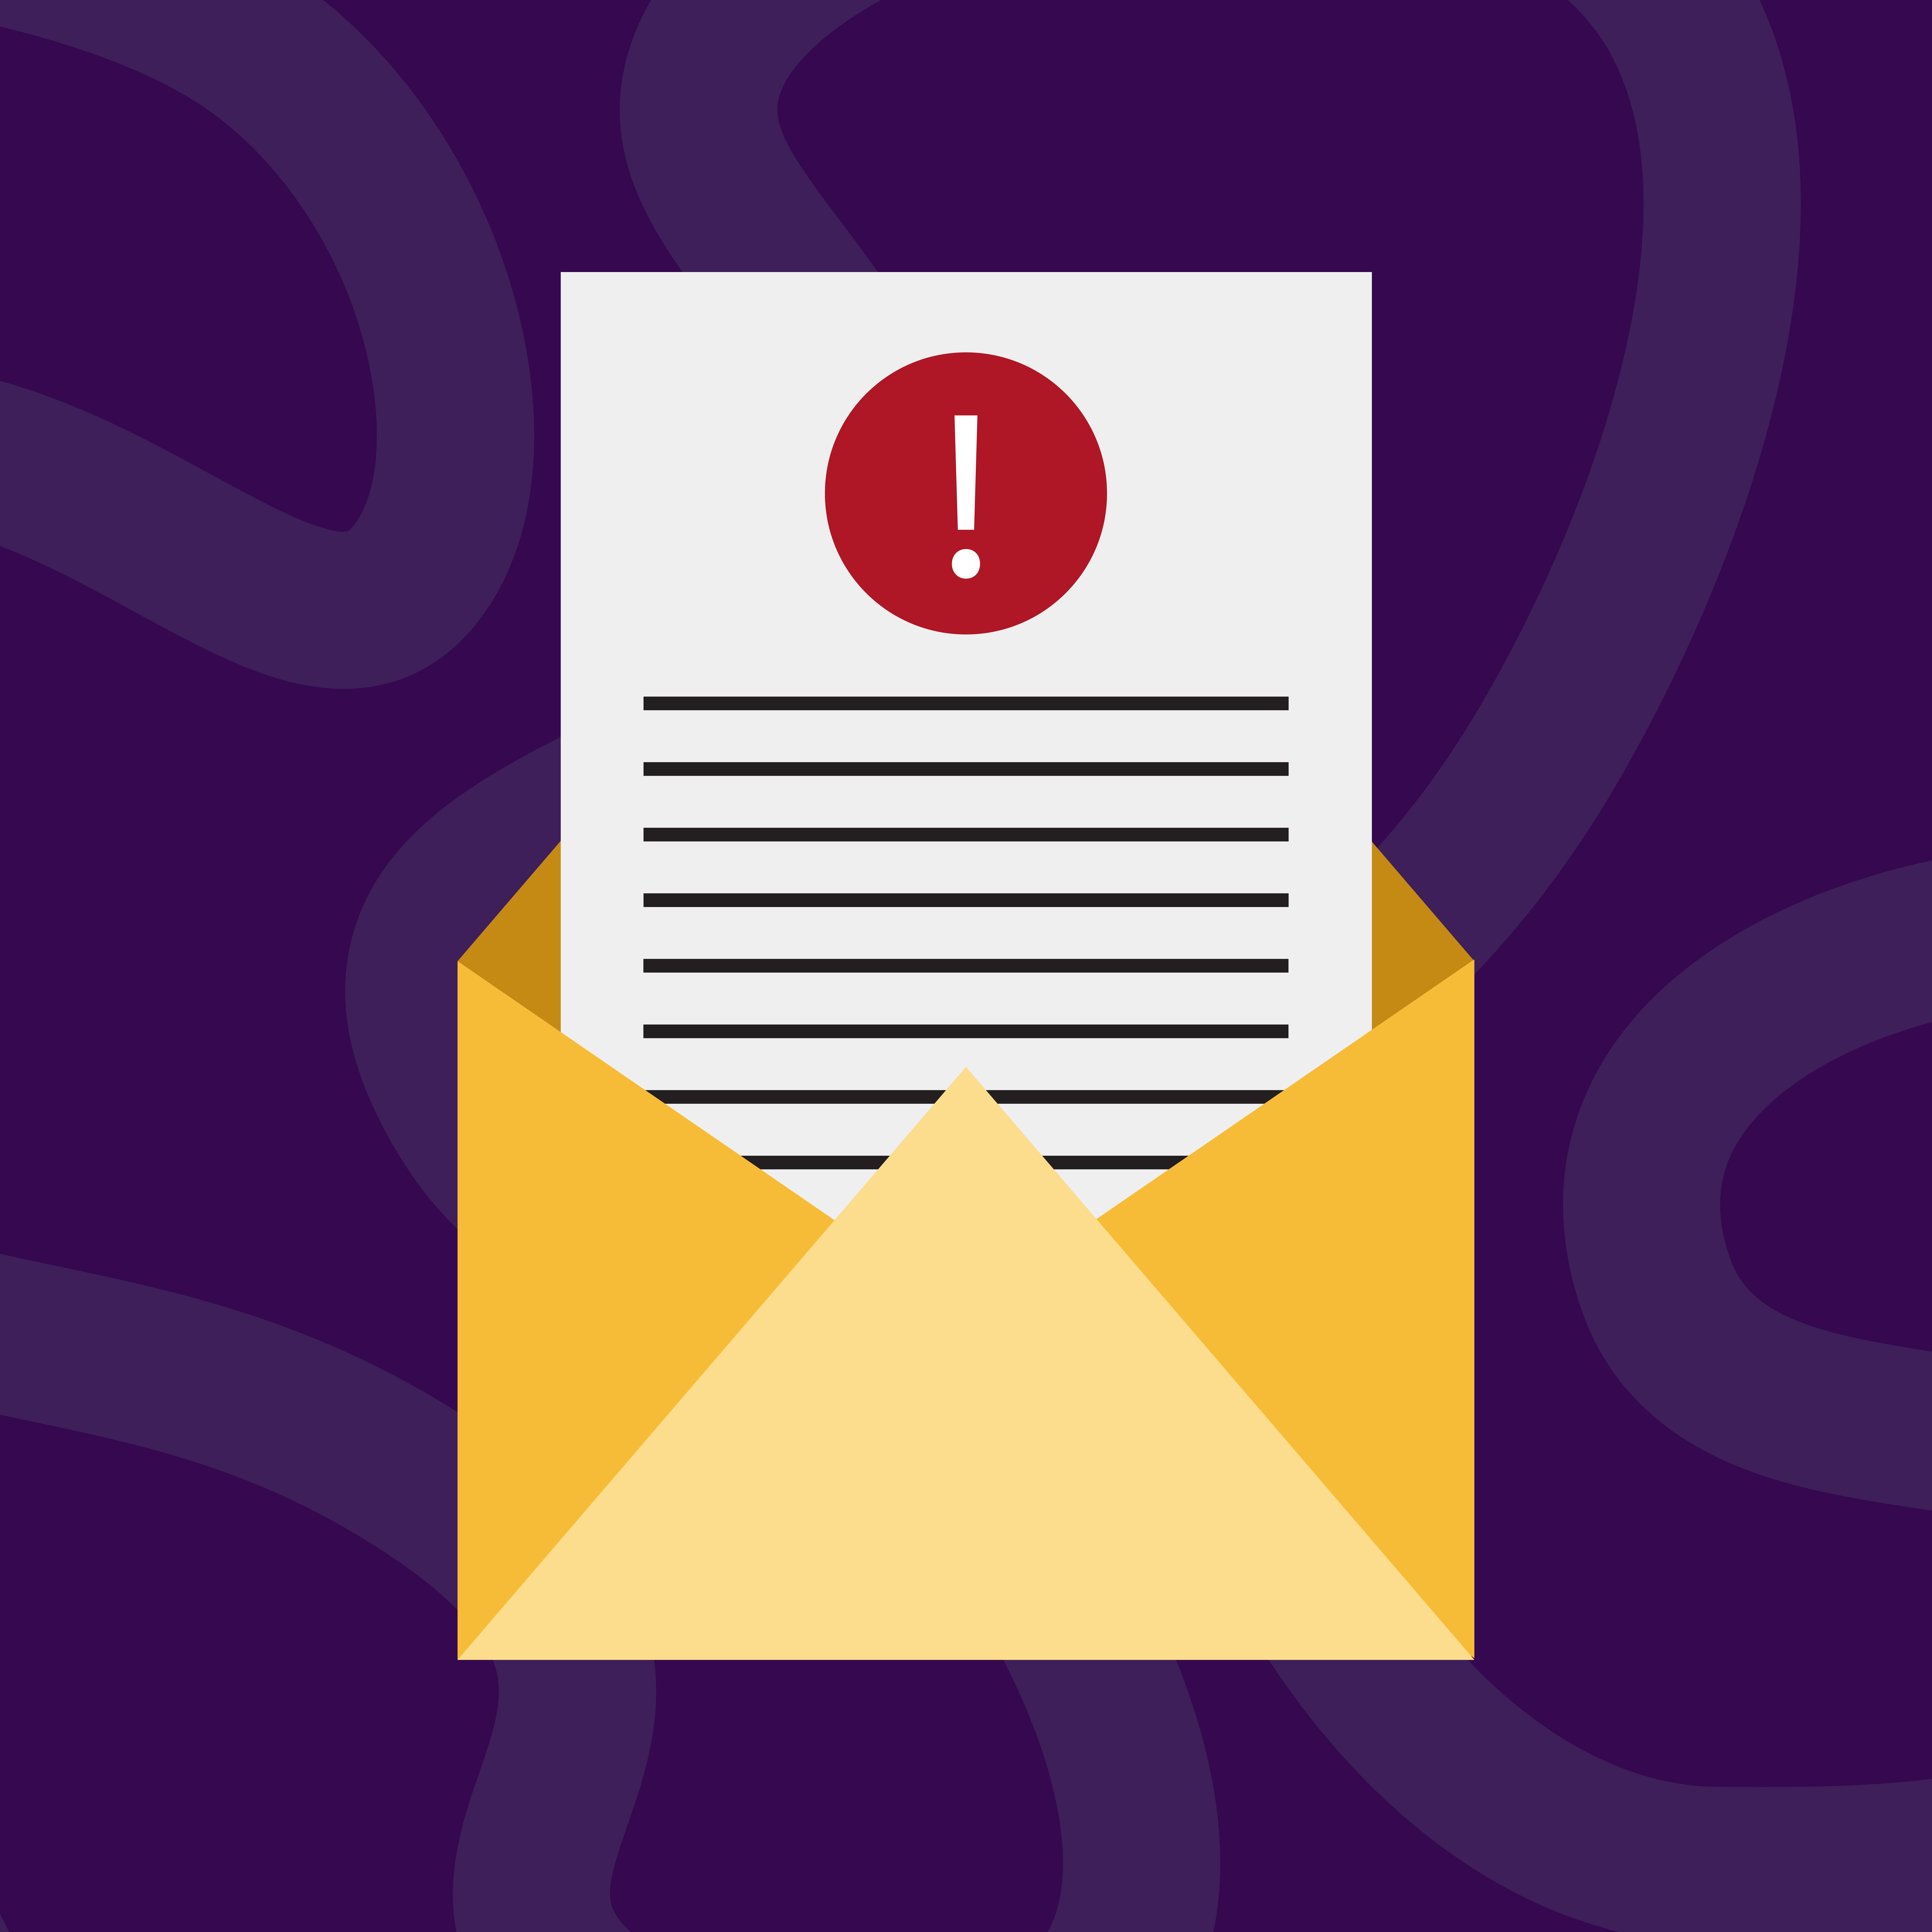 Illustration of a fraudulent email